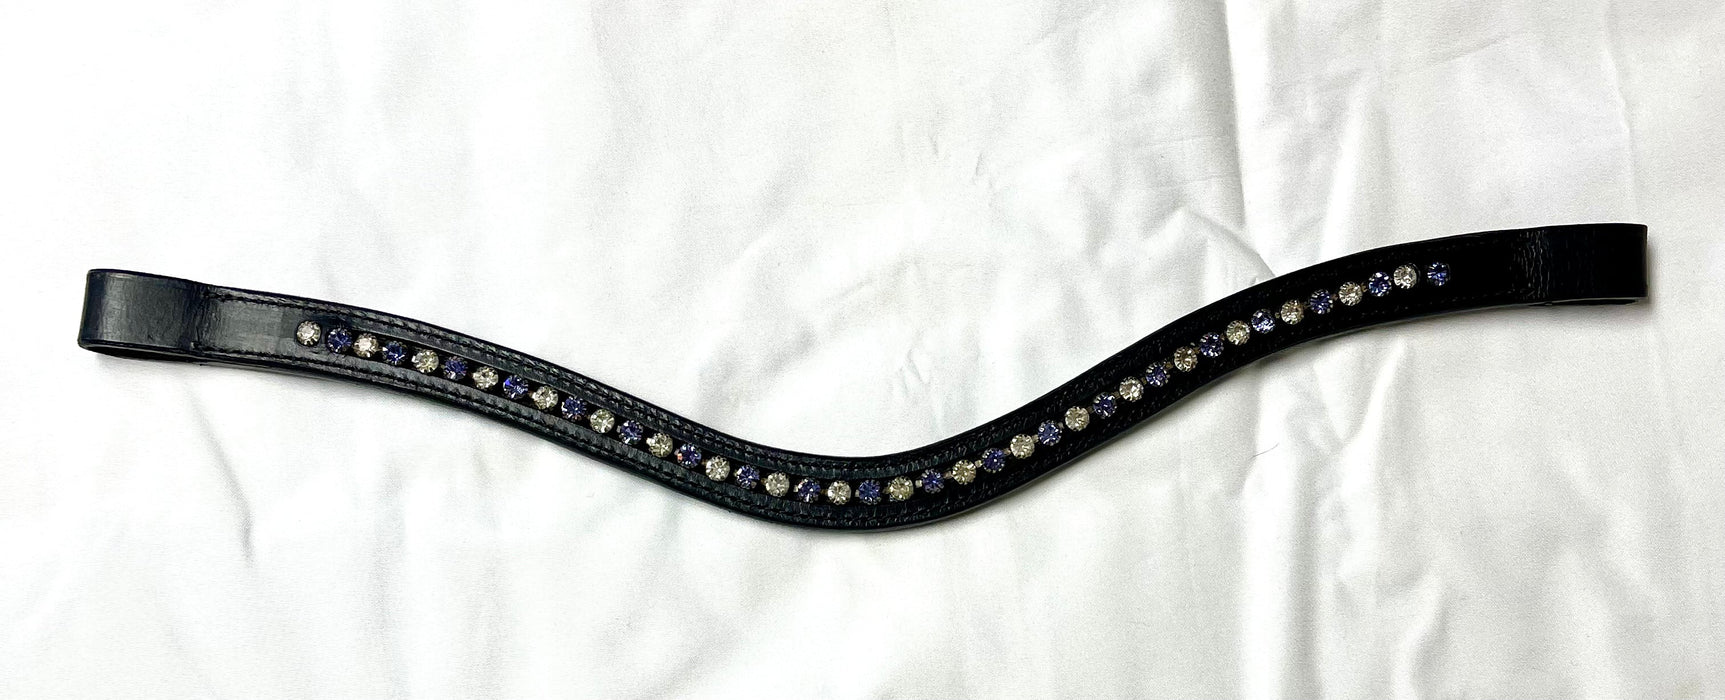 Curved Leather Browband w/Crystals - Lavendar/Clear Crystals